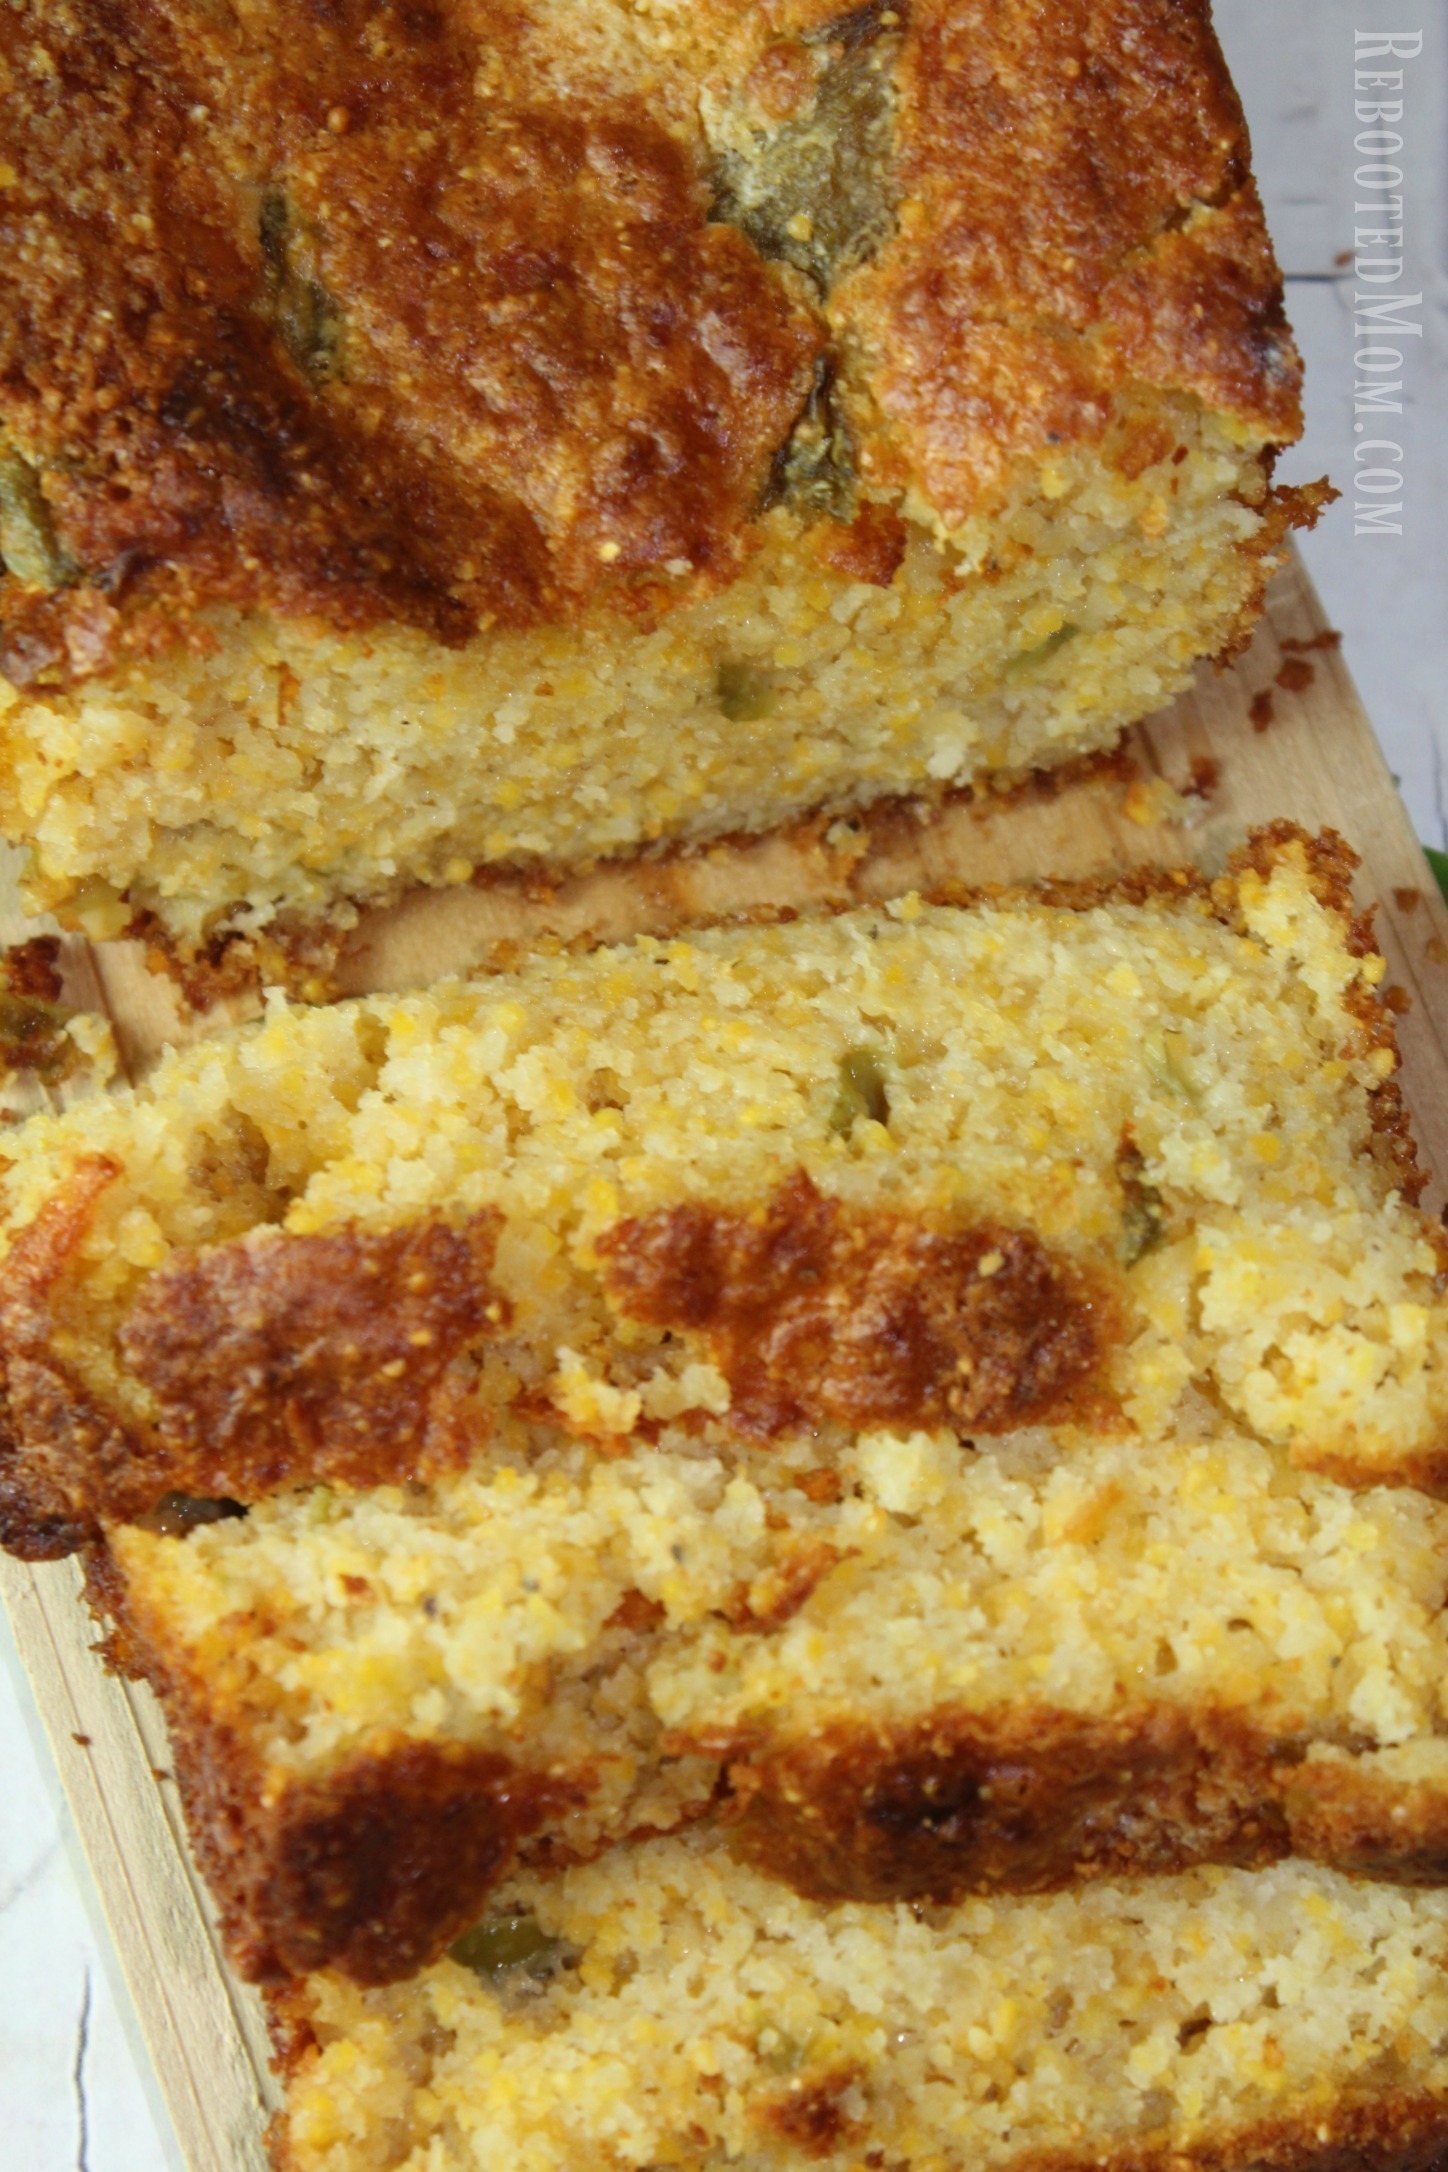 Combine fresh Hatch green chiles and cheese to make this moist, cheesy hatch green chile cornbread with a little kick! Perfect to serve with your next bowl of chili or eat as is!